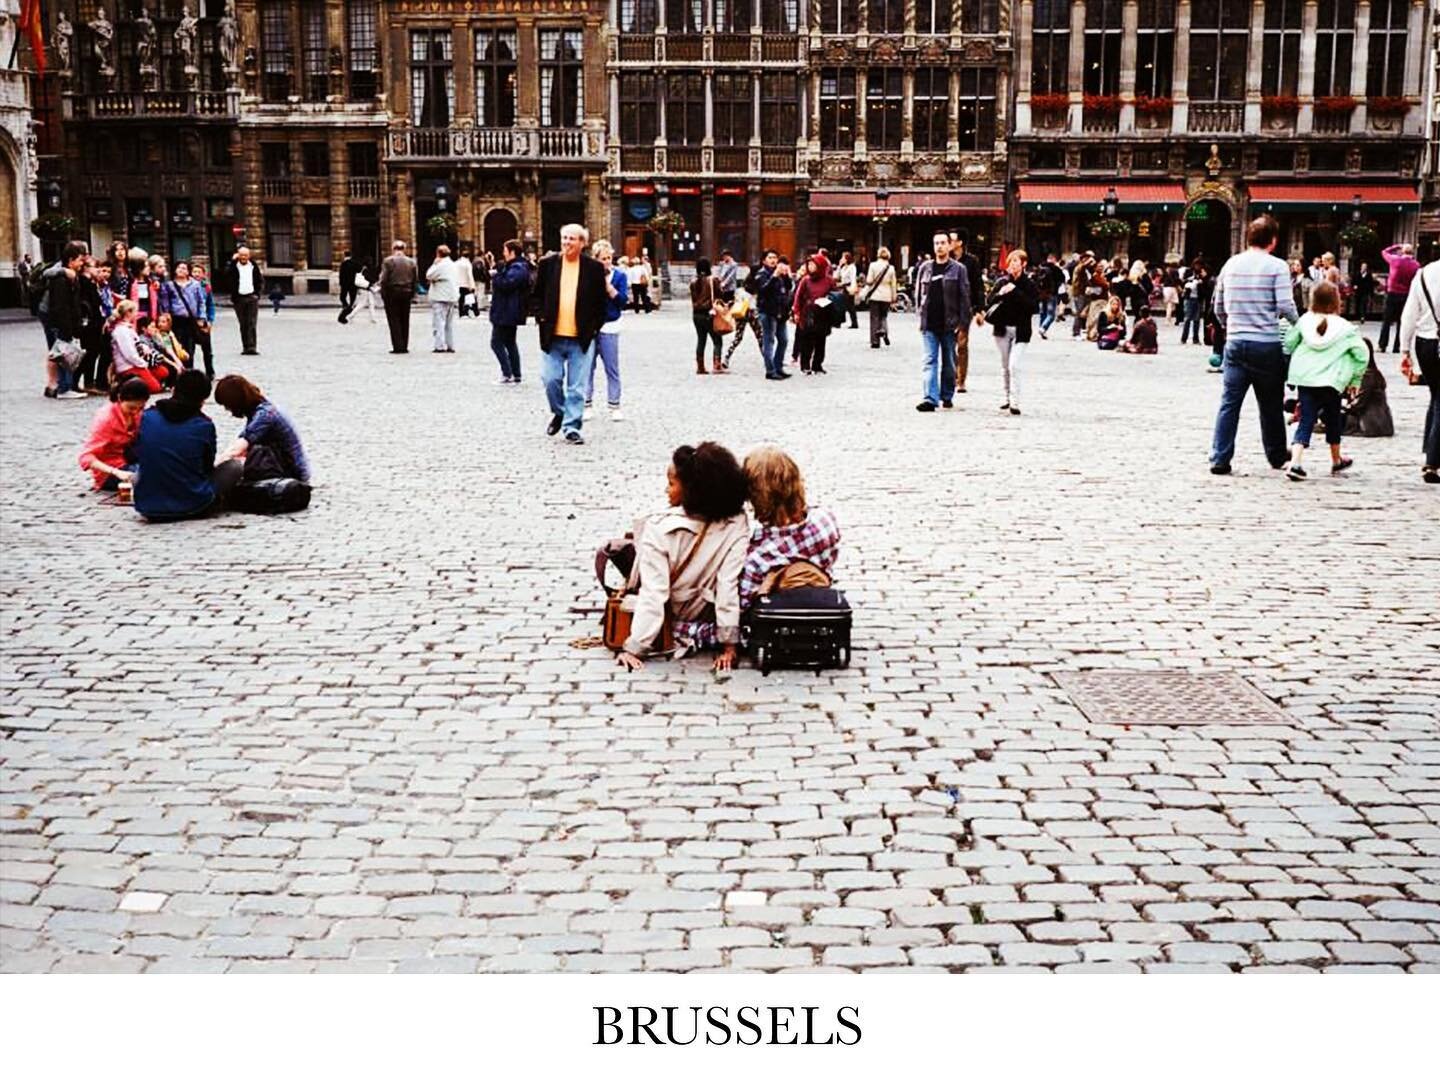 Victor Hugo was right. The grand place must be the most beautiful, romantic square in Europe. Wish can get there again with my life partner. 

#brussels #grandplacebrussels #lomography #travelphotography #traveltheworld